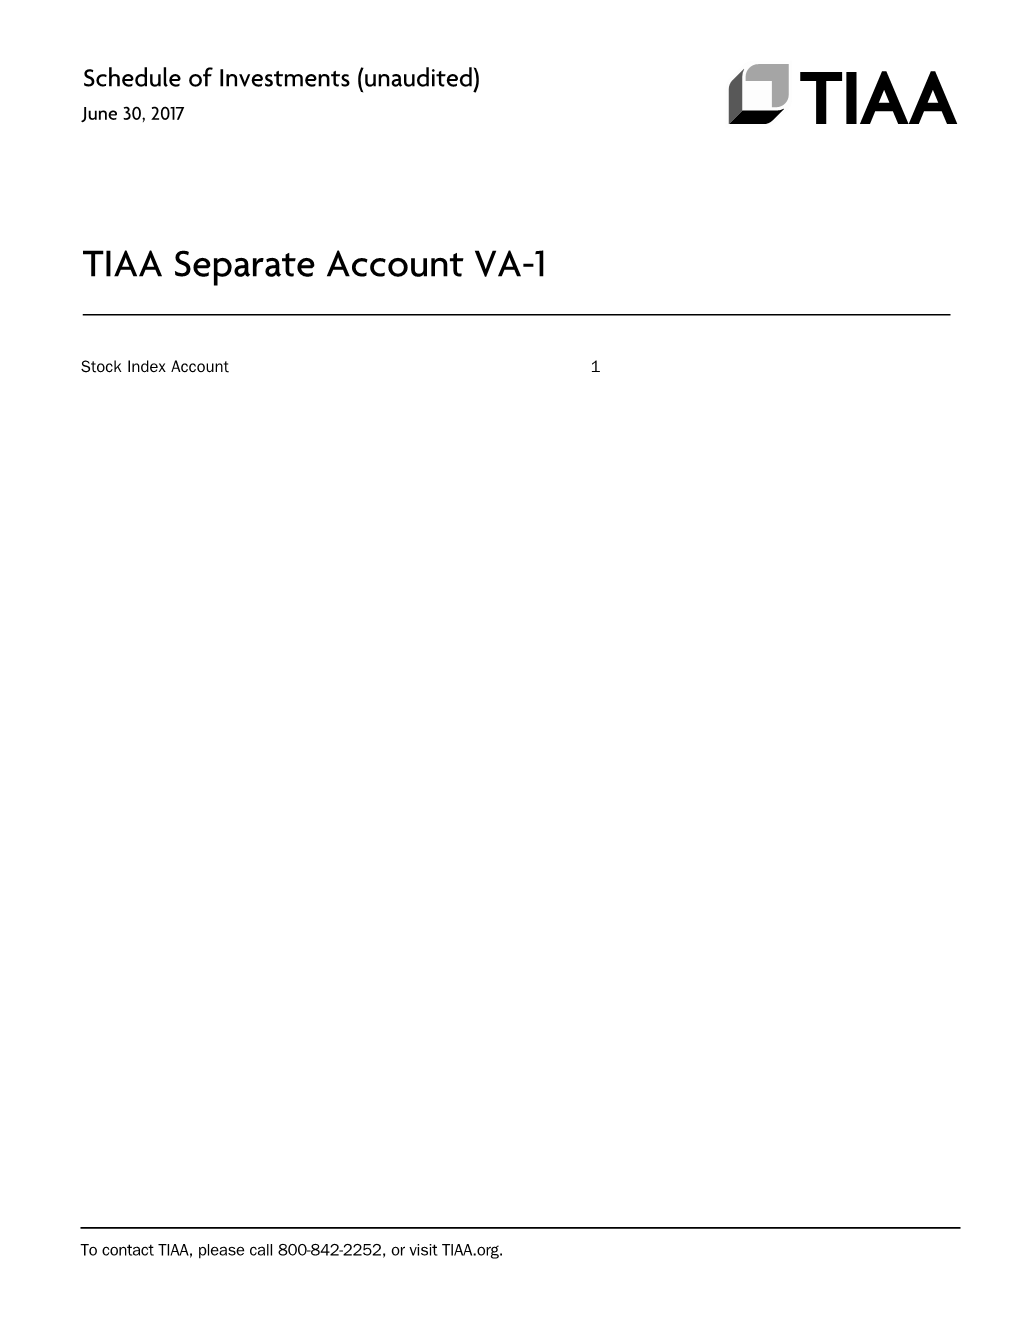 TIAA Separate Account VA-1 Schedule of Investments Dated 6-30